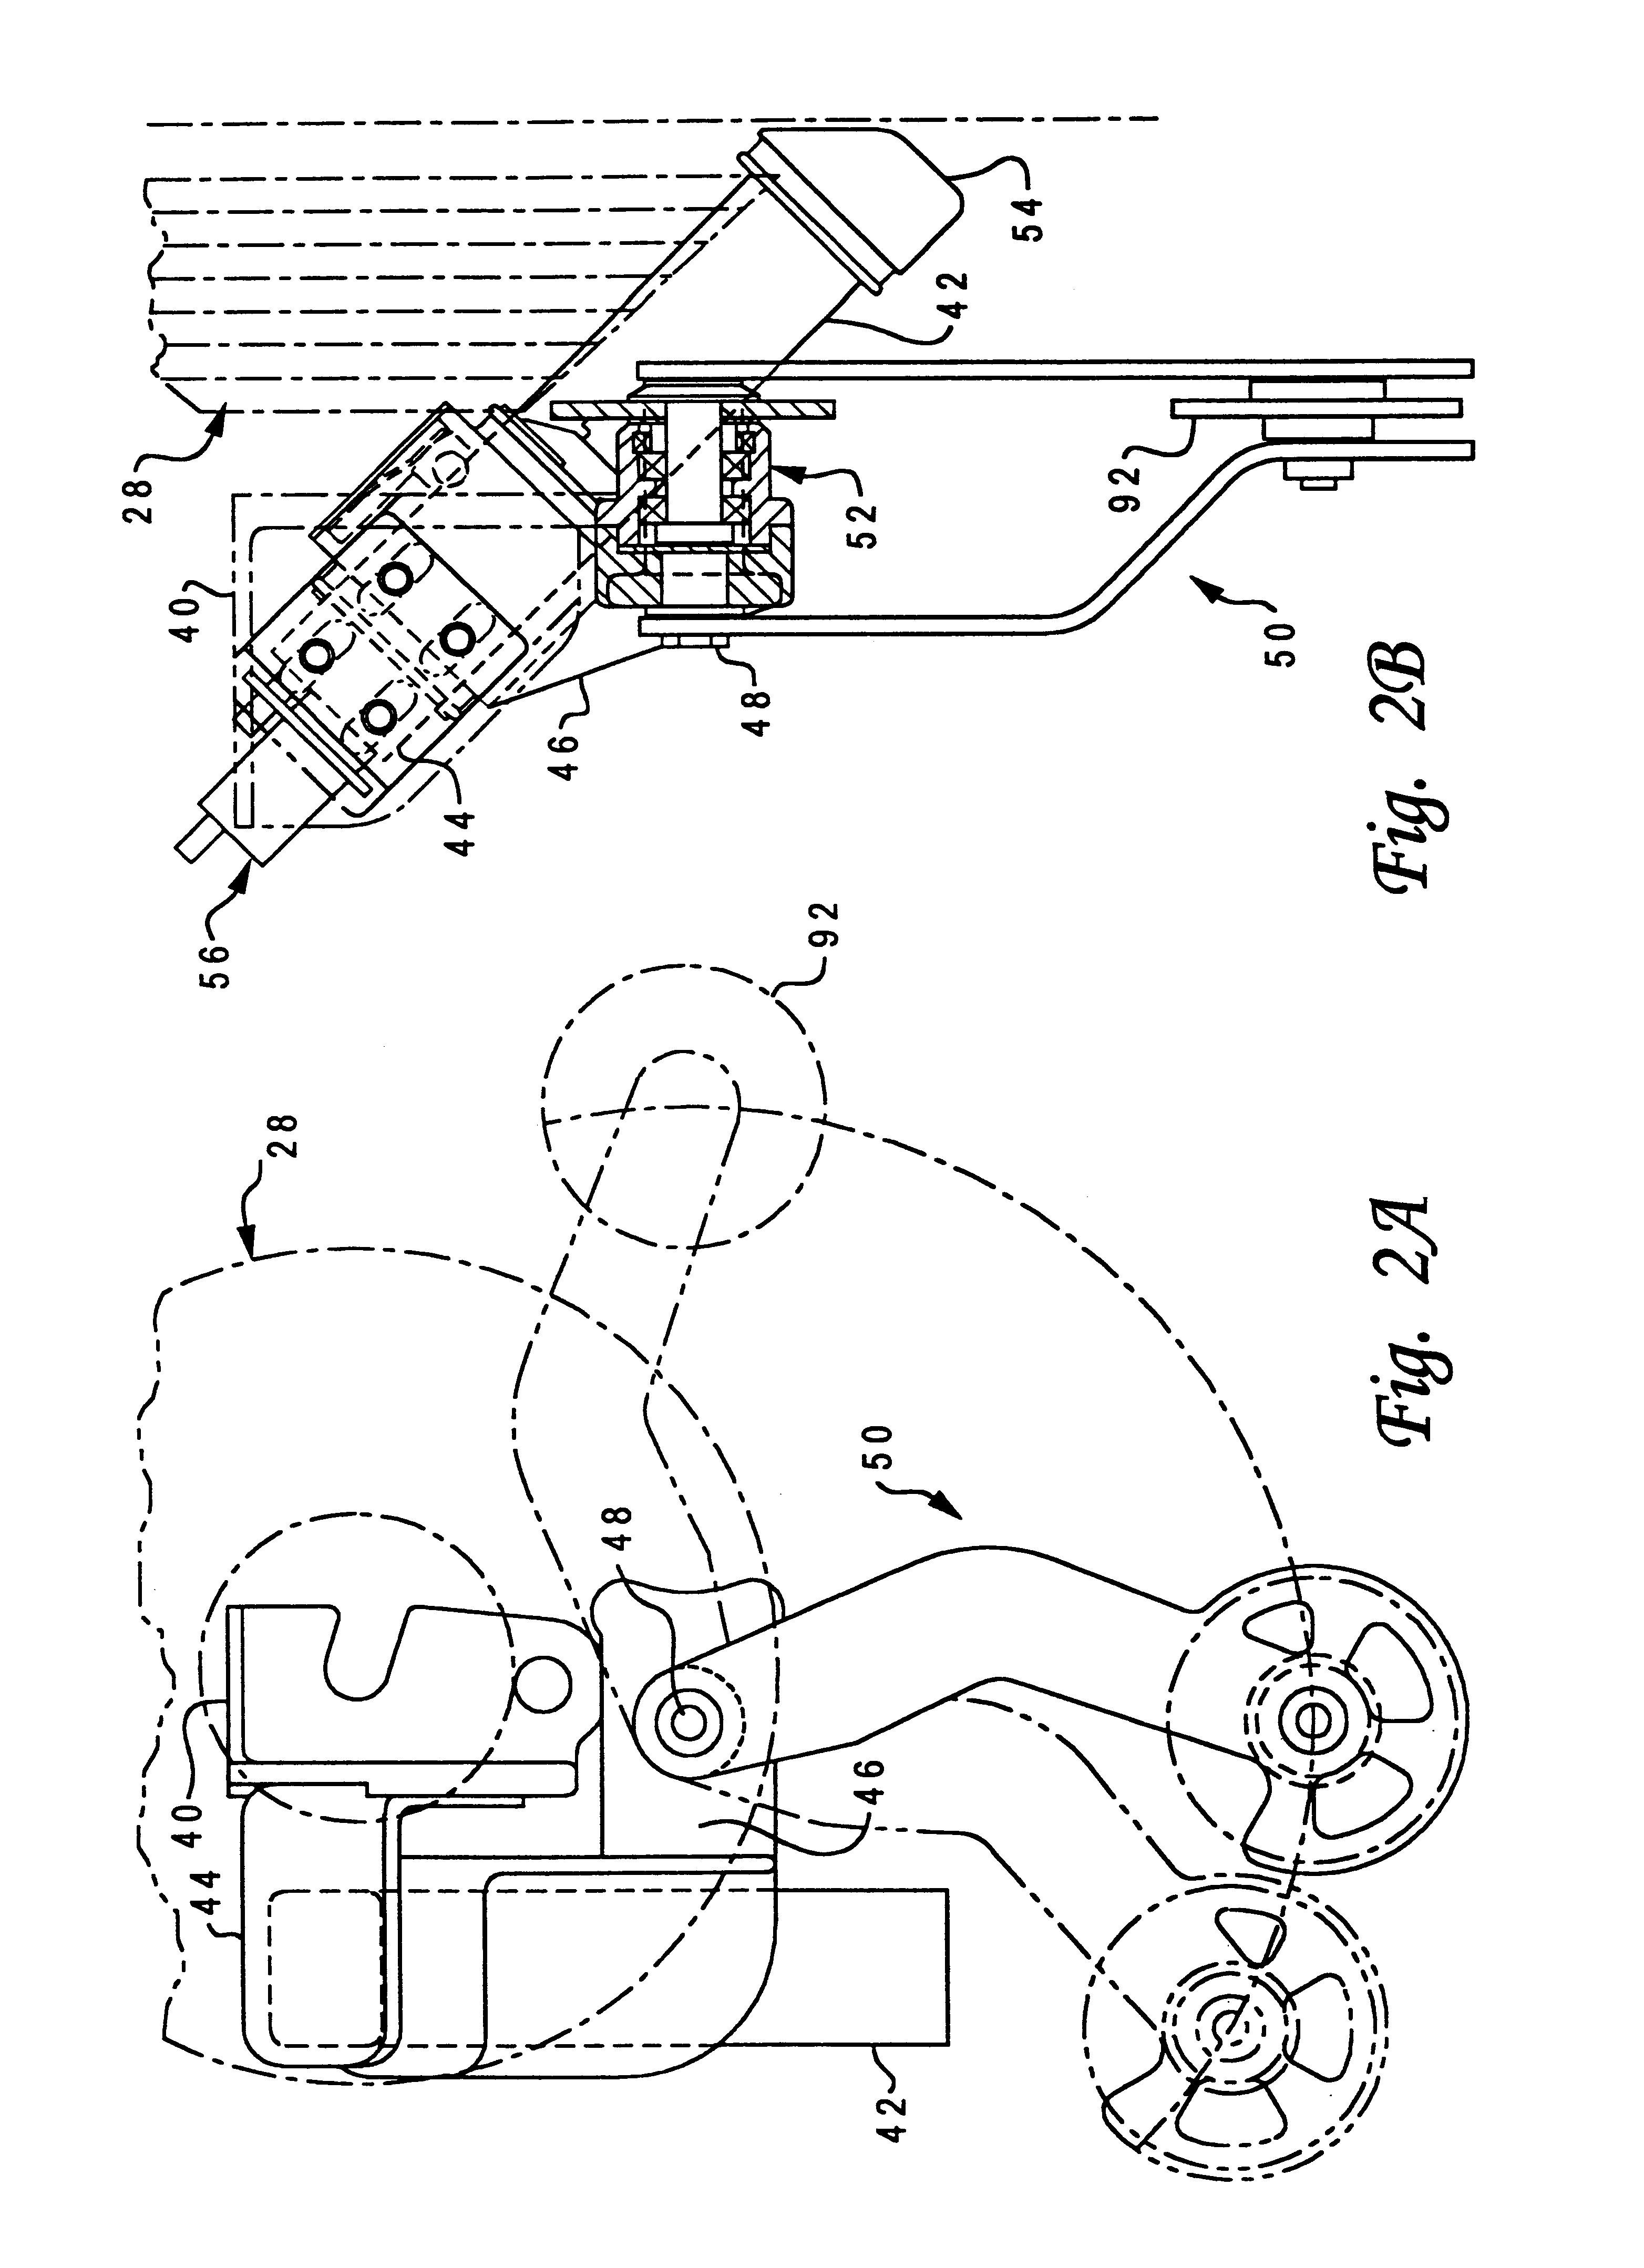 Hydraulically-operated bicycle shifting system with power shifting